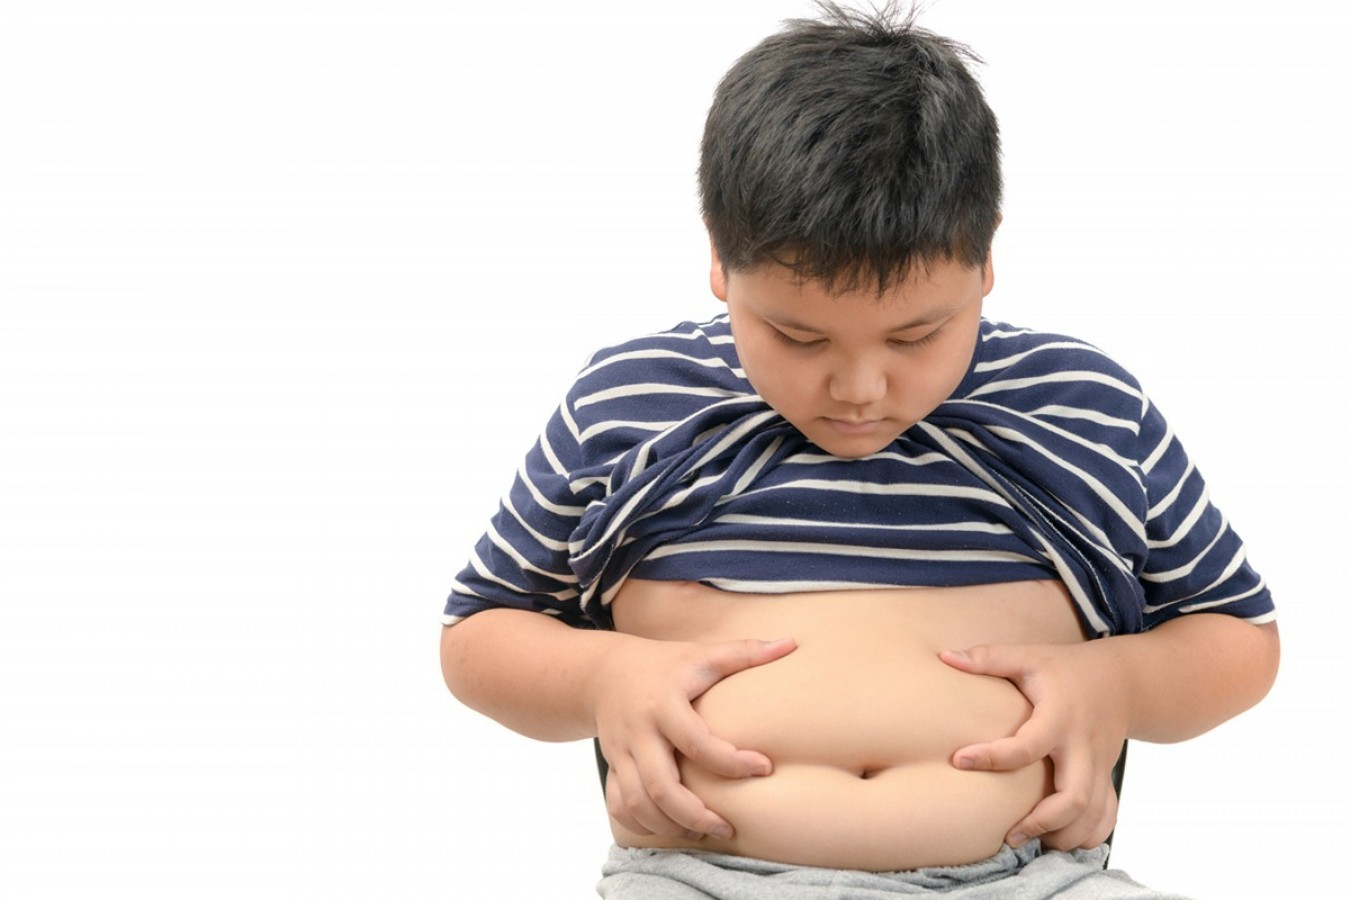 Childhood Obesity: Causes, Consequences, and Prevention